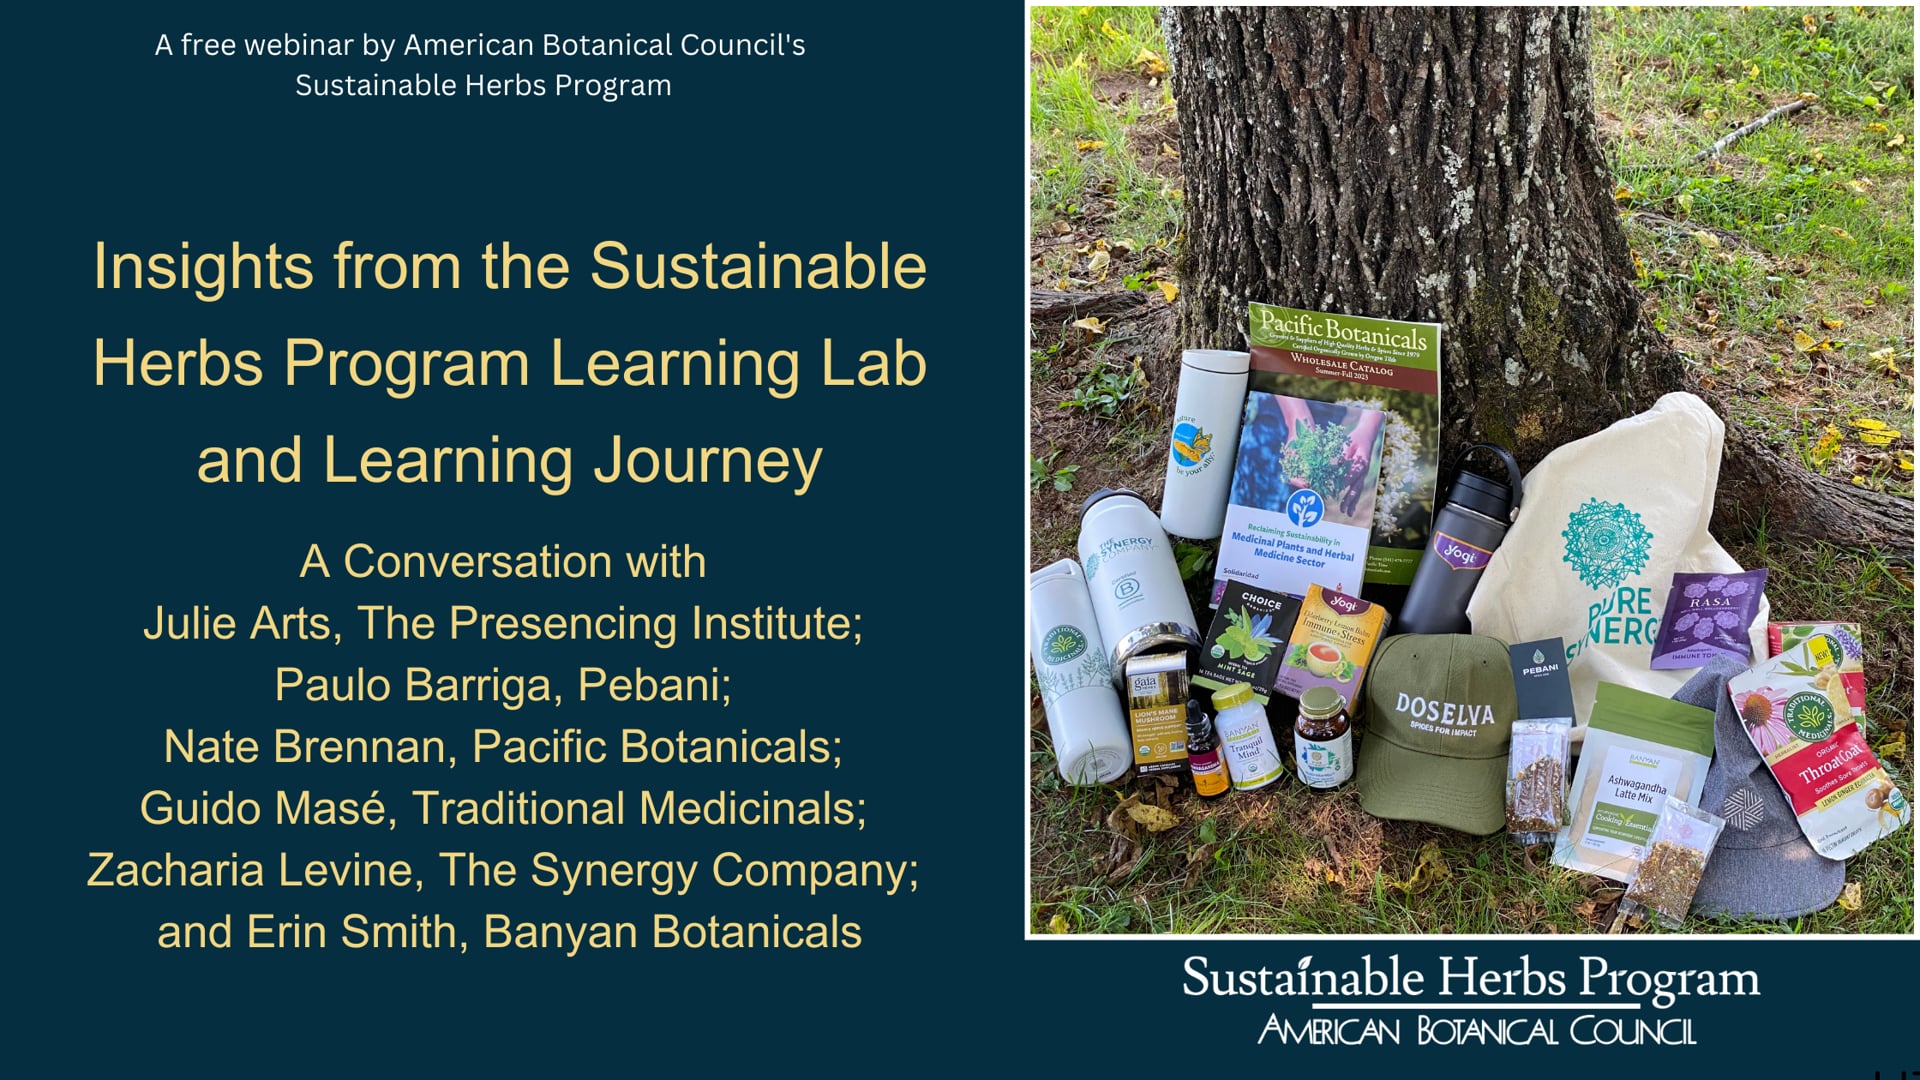 Insights from the Sustainable Herbs Program Learning Journey